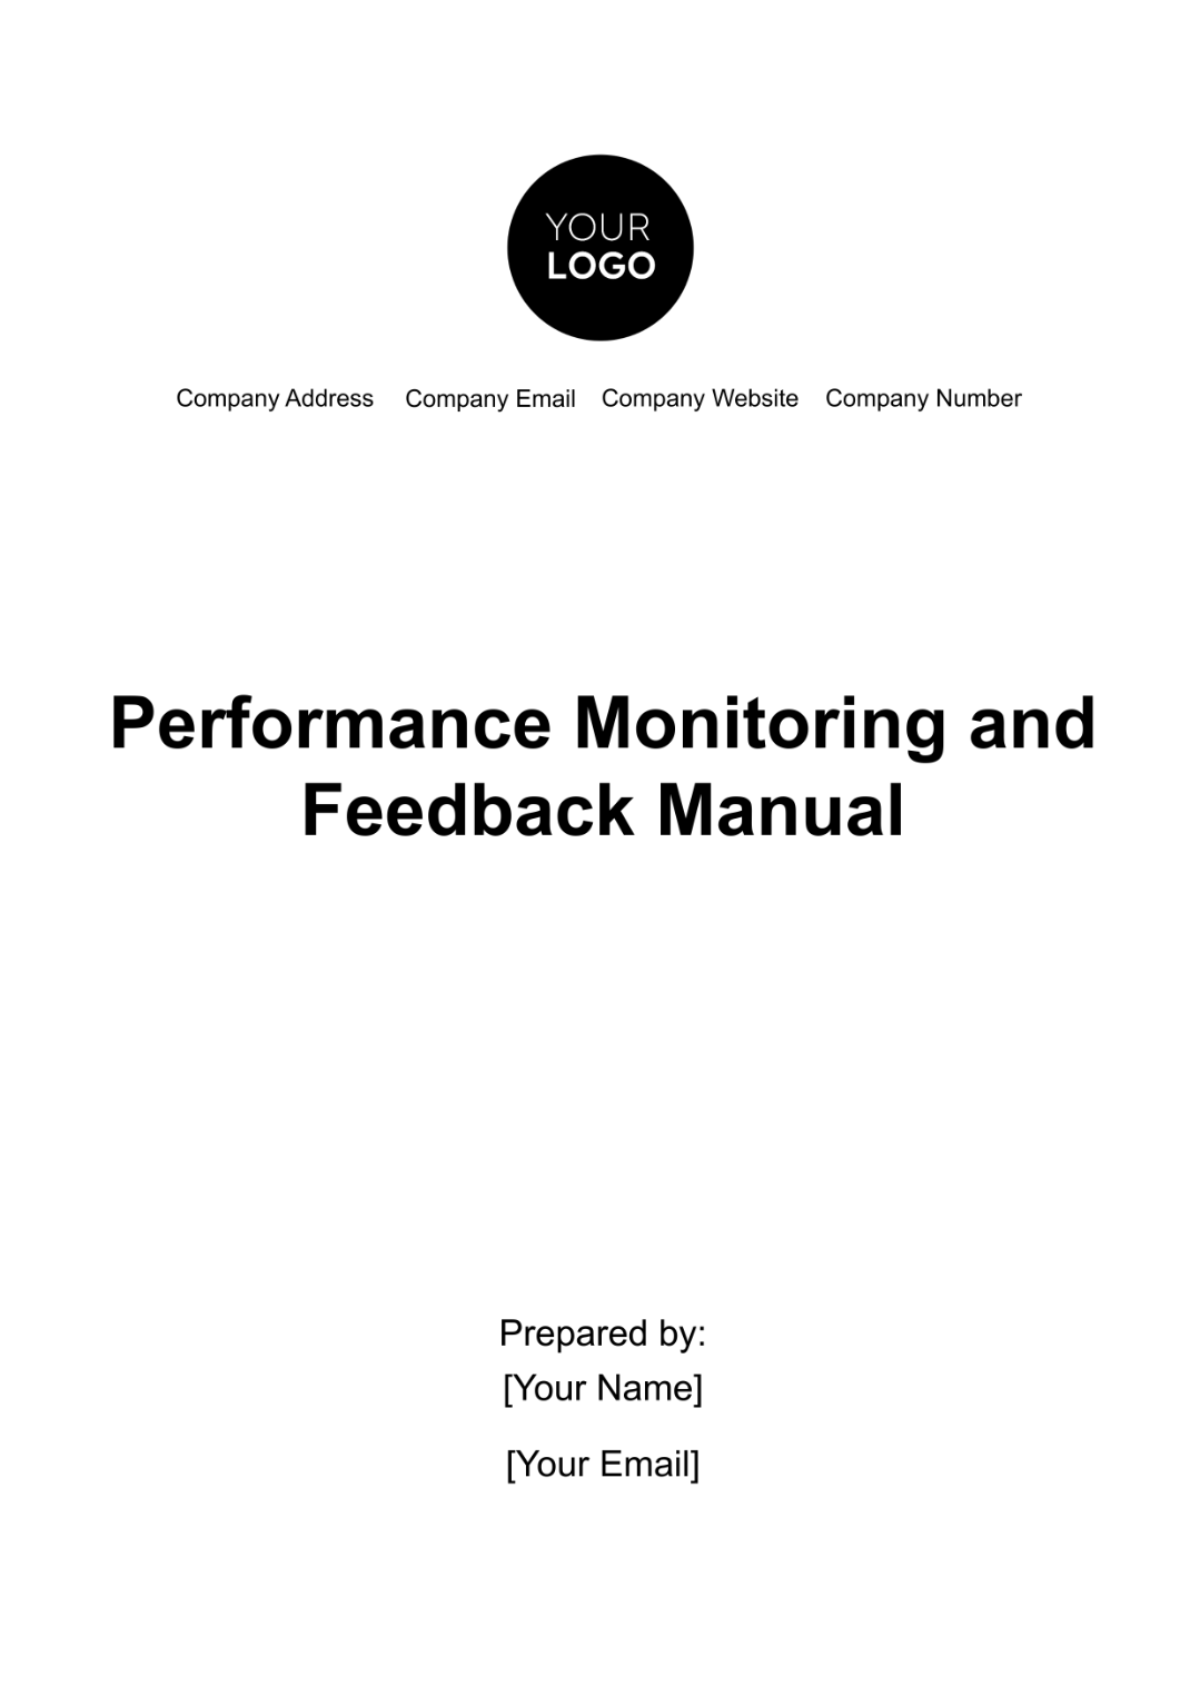 Free Performance Monitoring and Feedback Manual HR Template